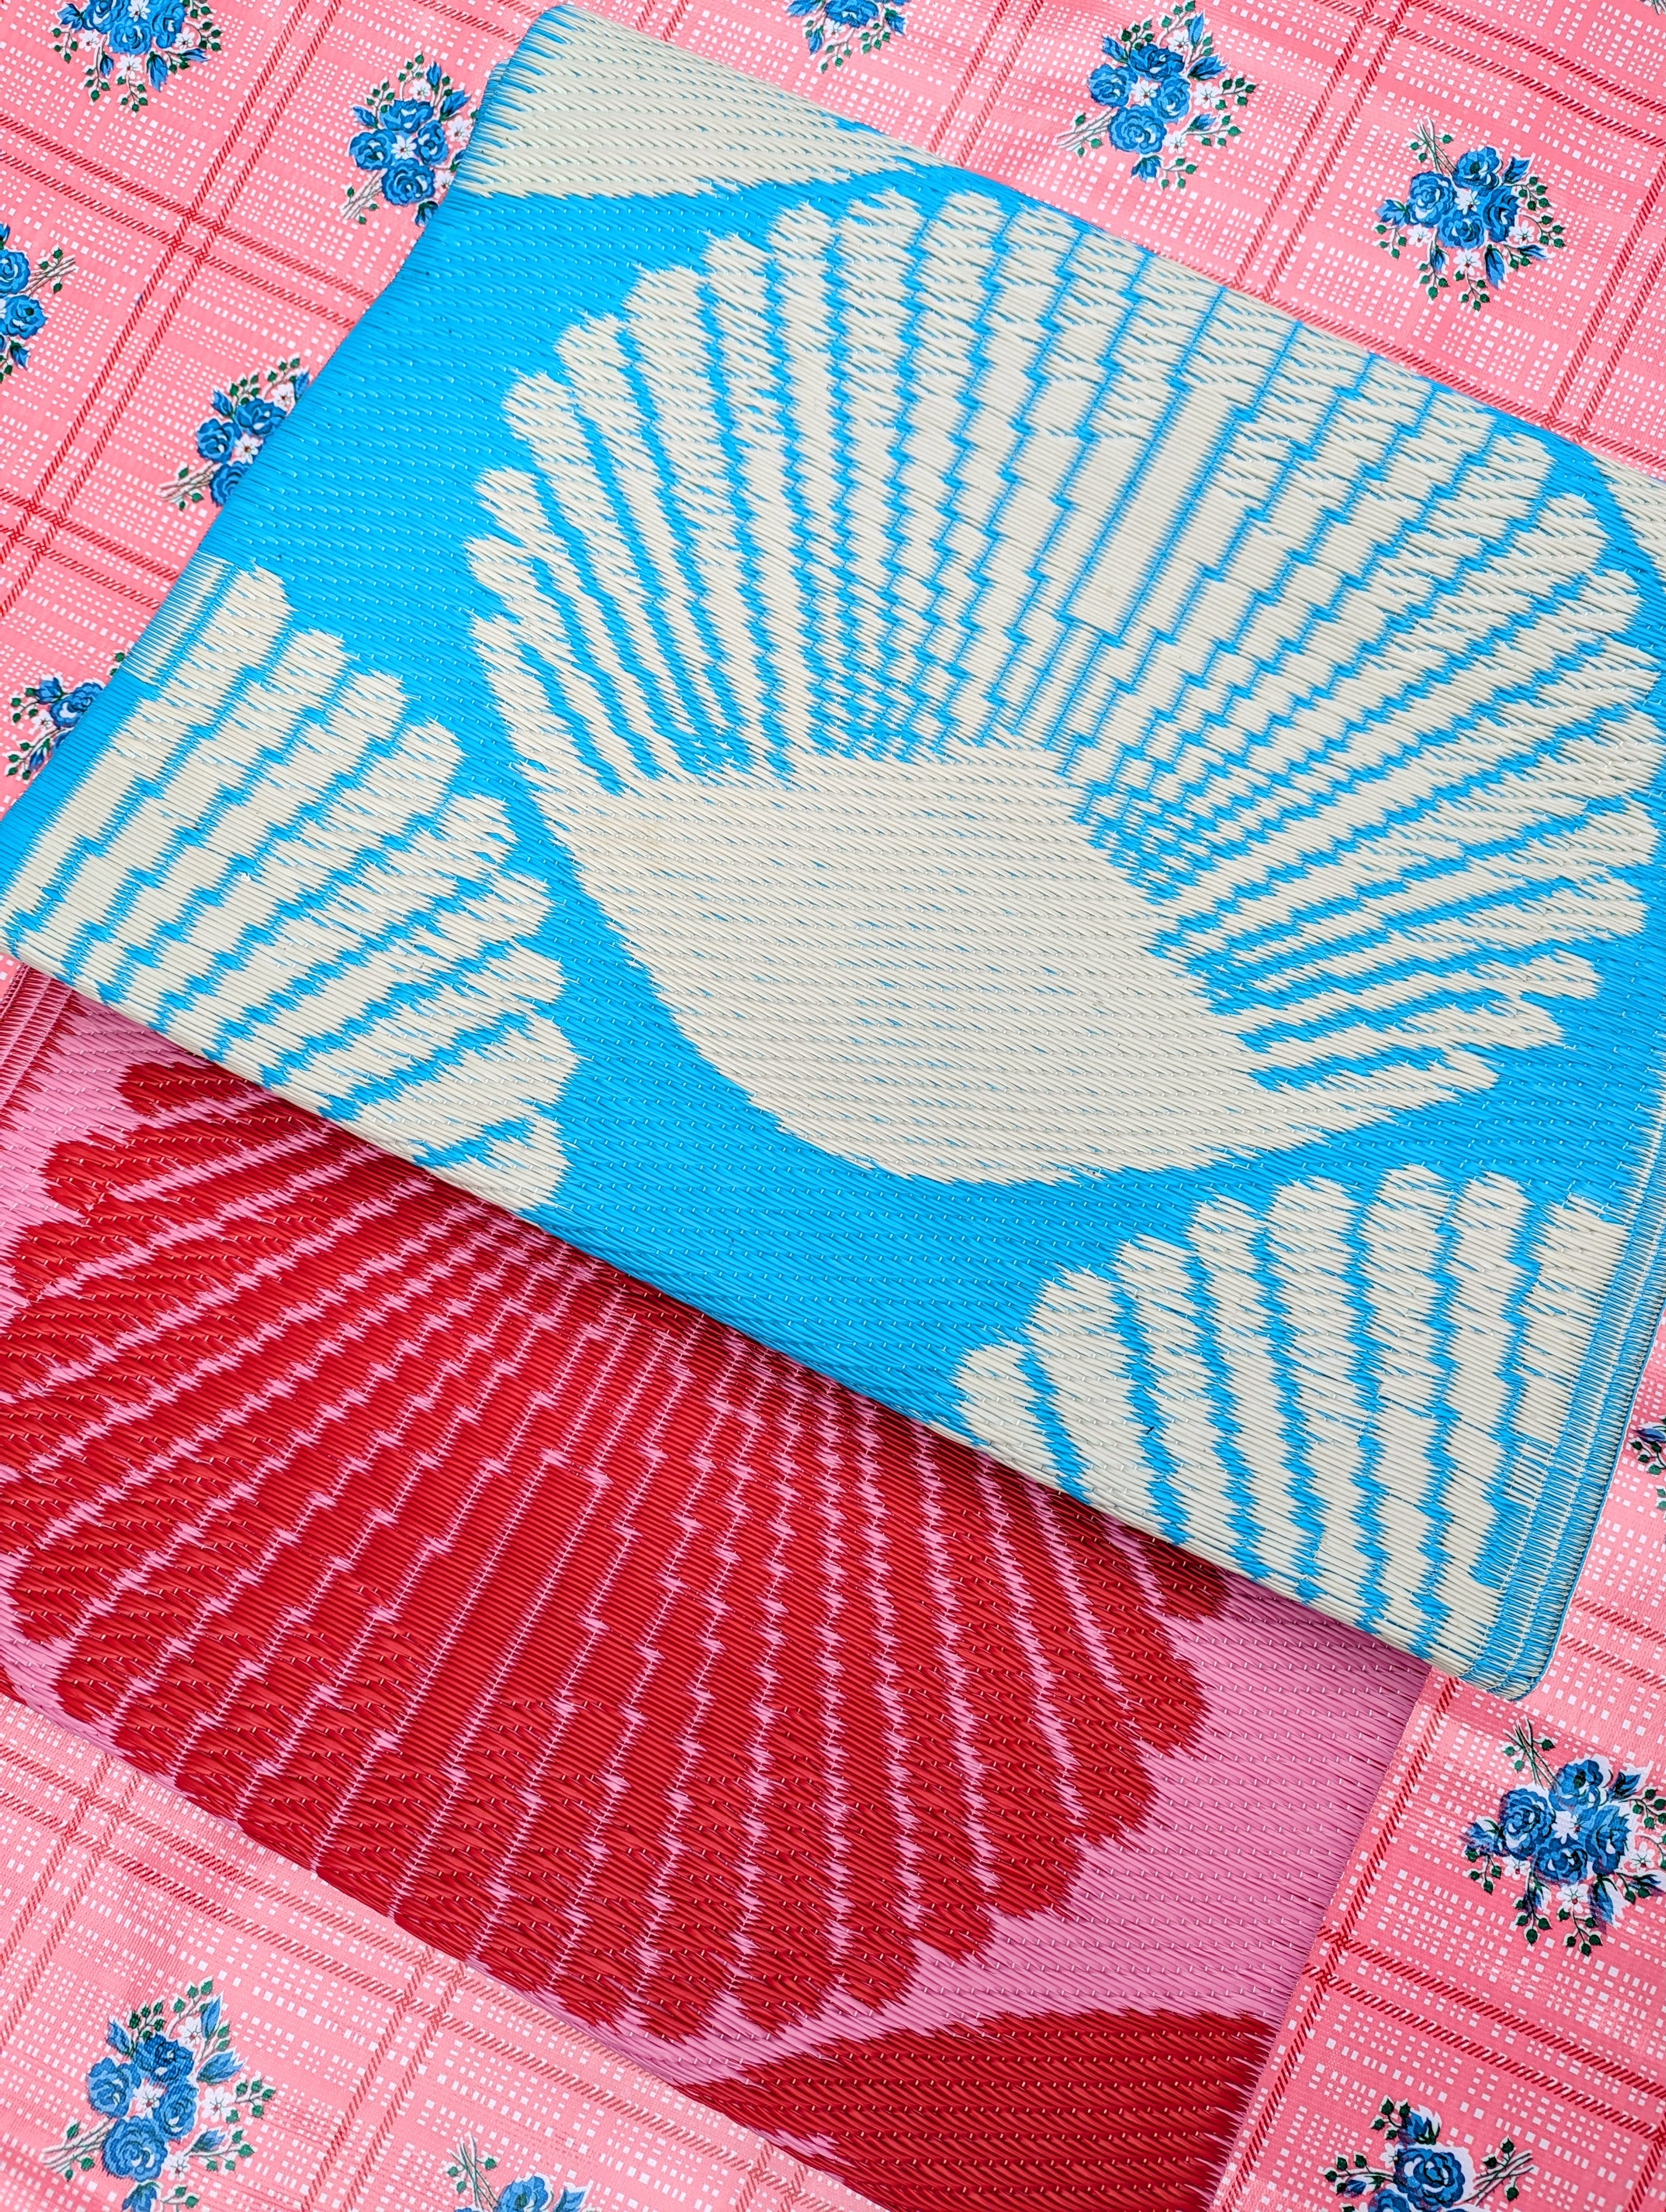 Shell recycled plastic mat